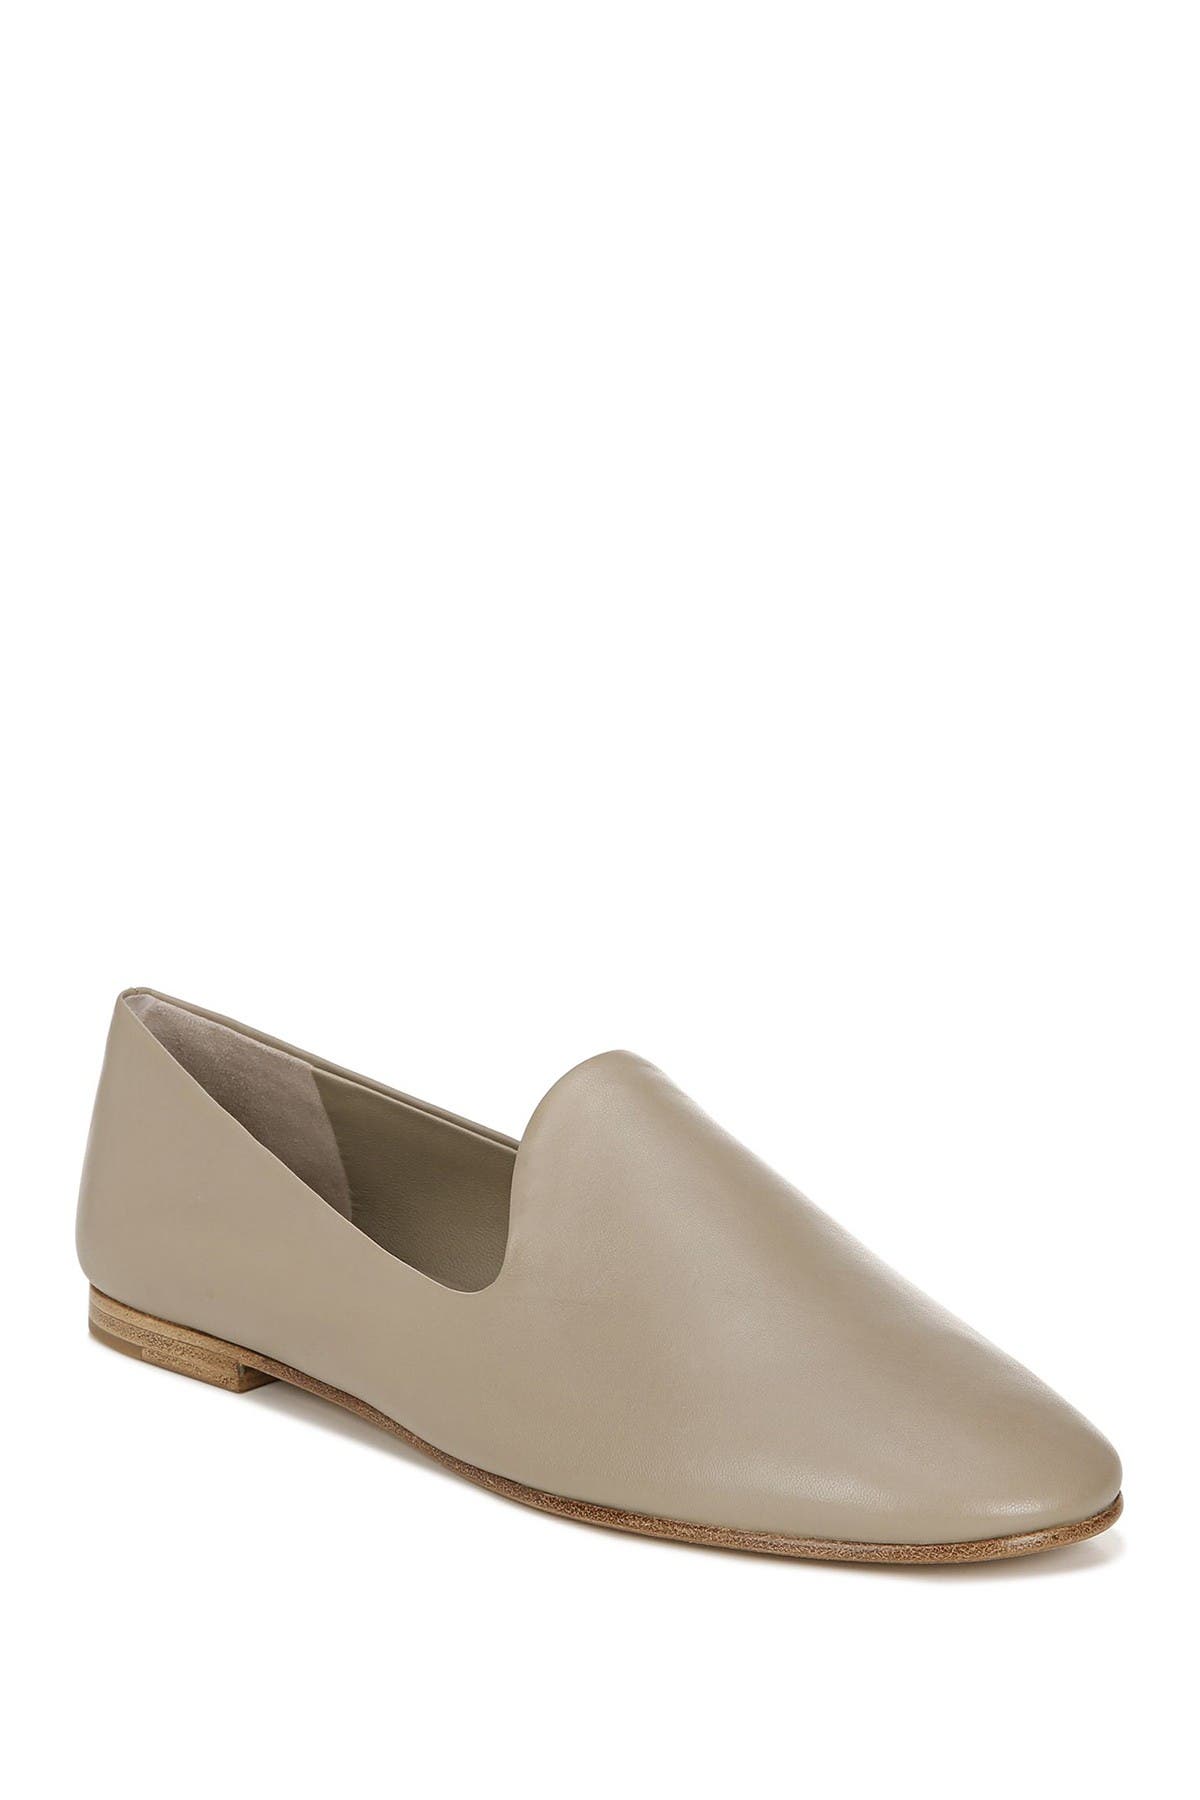 vince leather slip on shoes